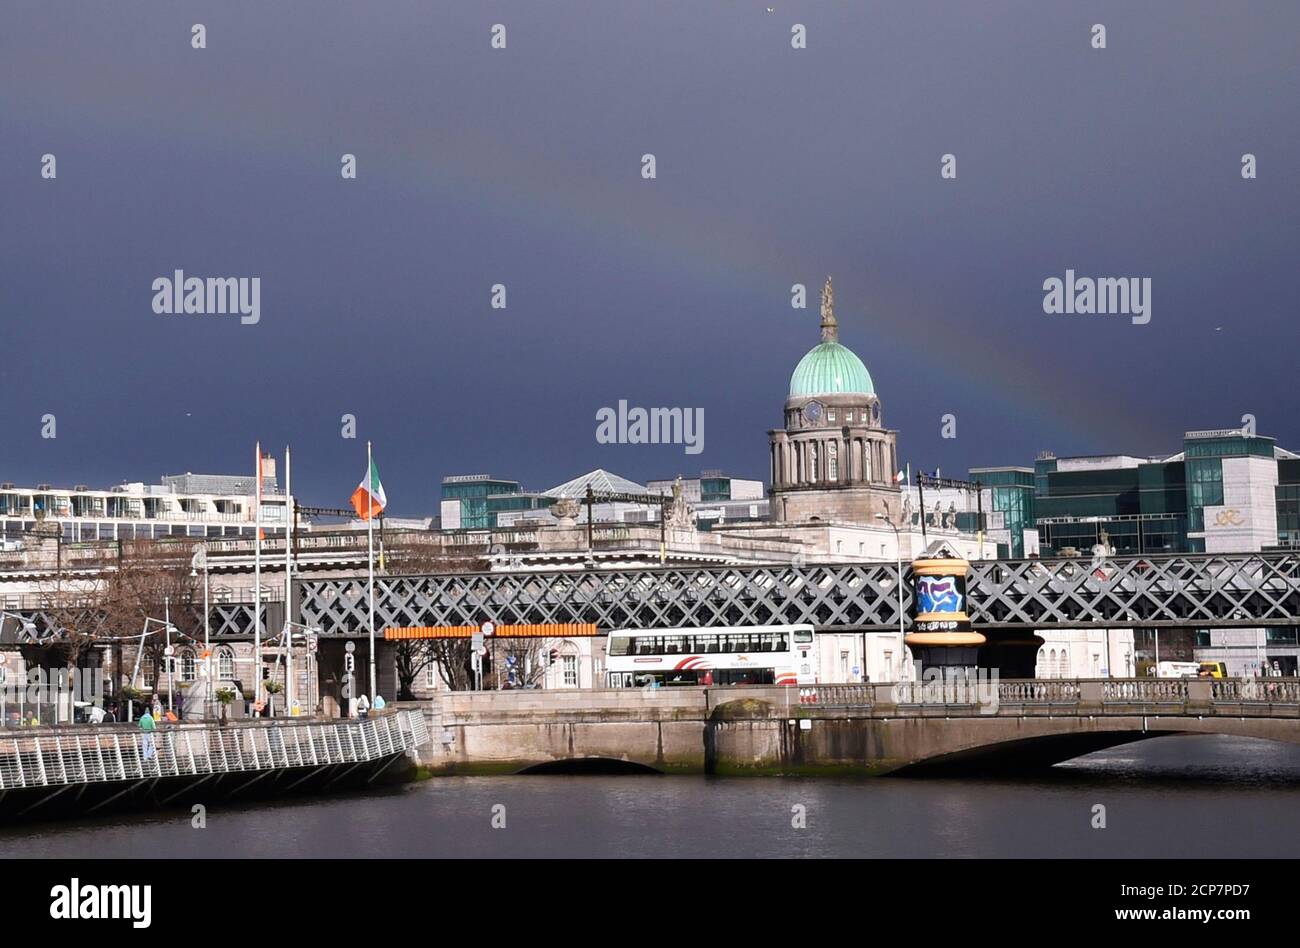 A rainbow arches accross the sky during the commemoration of the 100 year anniversary of the Irish Easter Rising in Dublin, Ireland, March 27, 2016.  REUTERS/Clodagh Kilcoyne Stock Photo